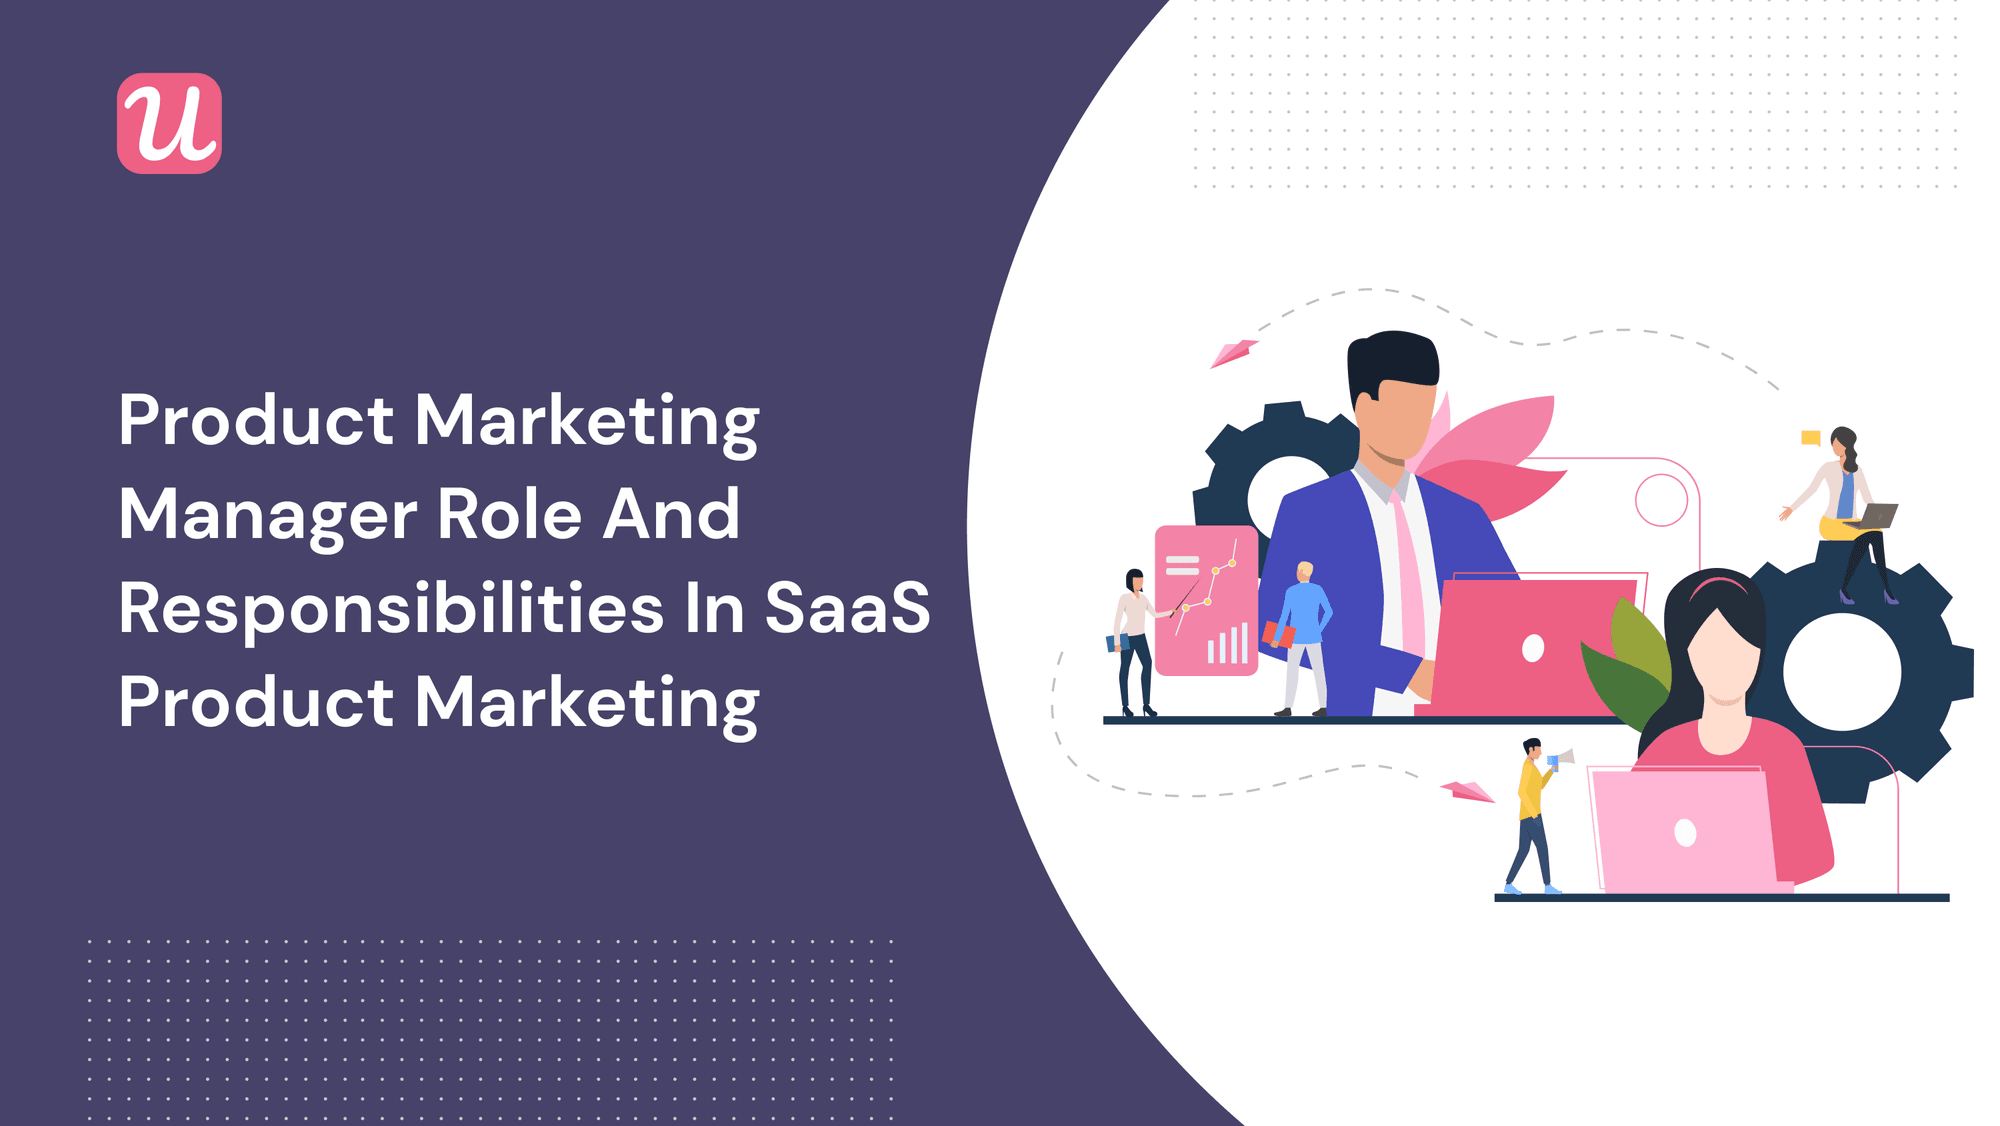 What You Need To Know About The Product Marketing Manager Role and Responsibilities